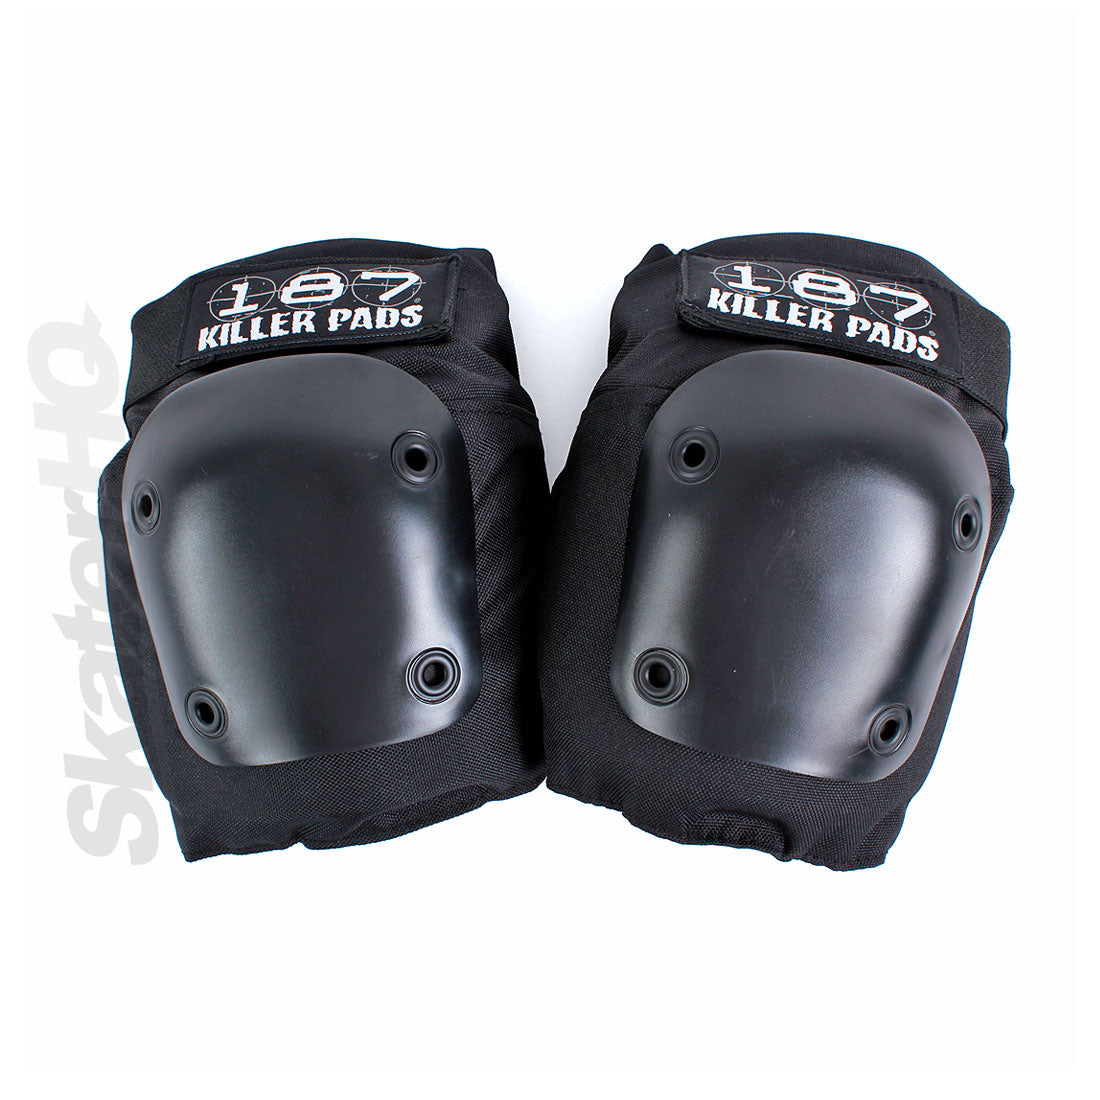 187 Fly Knee Pads - Black Protective Gear